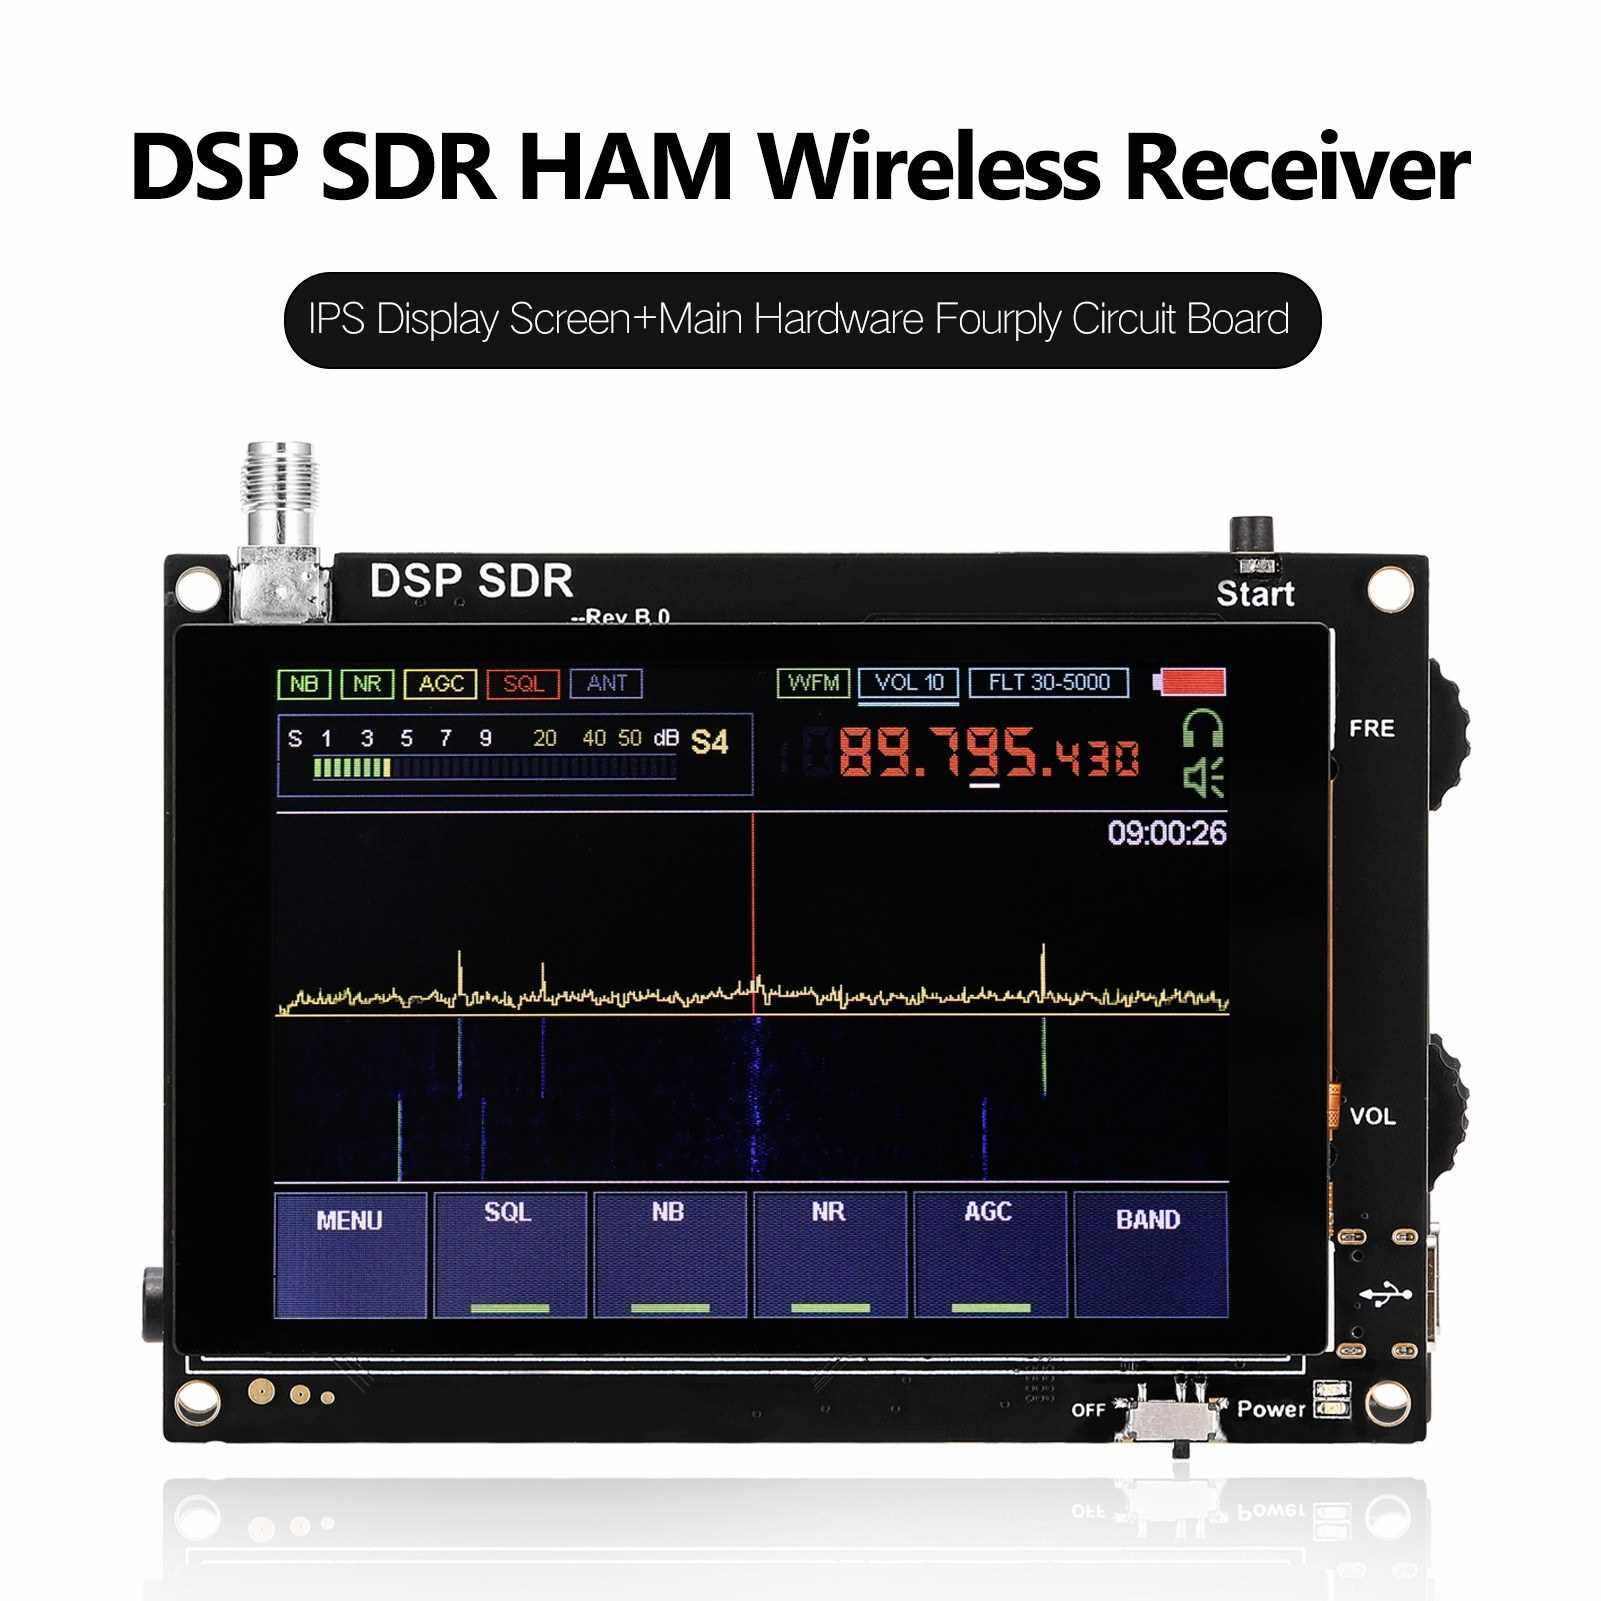 DSP SDR HAM Wireless Receiver Accessory 3.5 Inch Touchable IPS Display Screen+Main Hardware Fourply Circuit Board Impedance Matching (Standard)